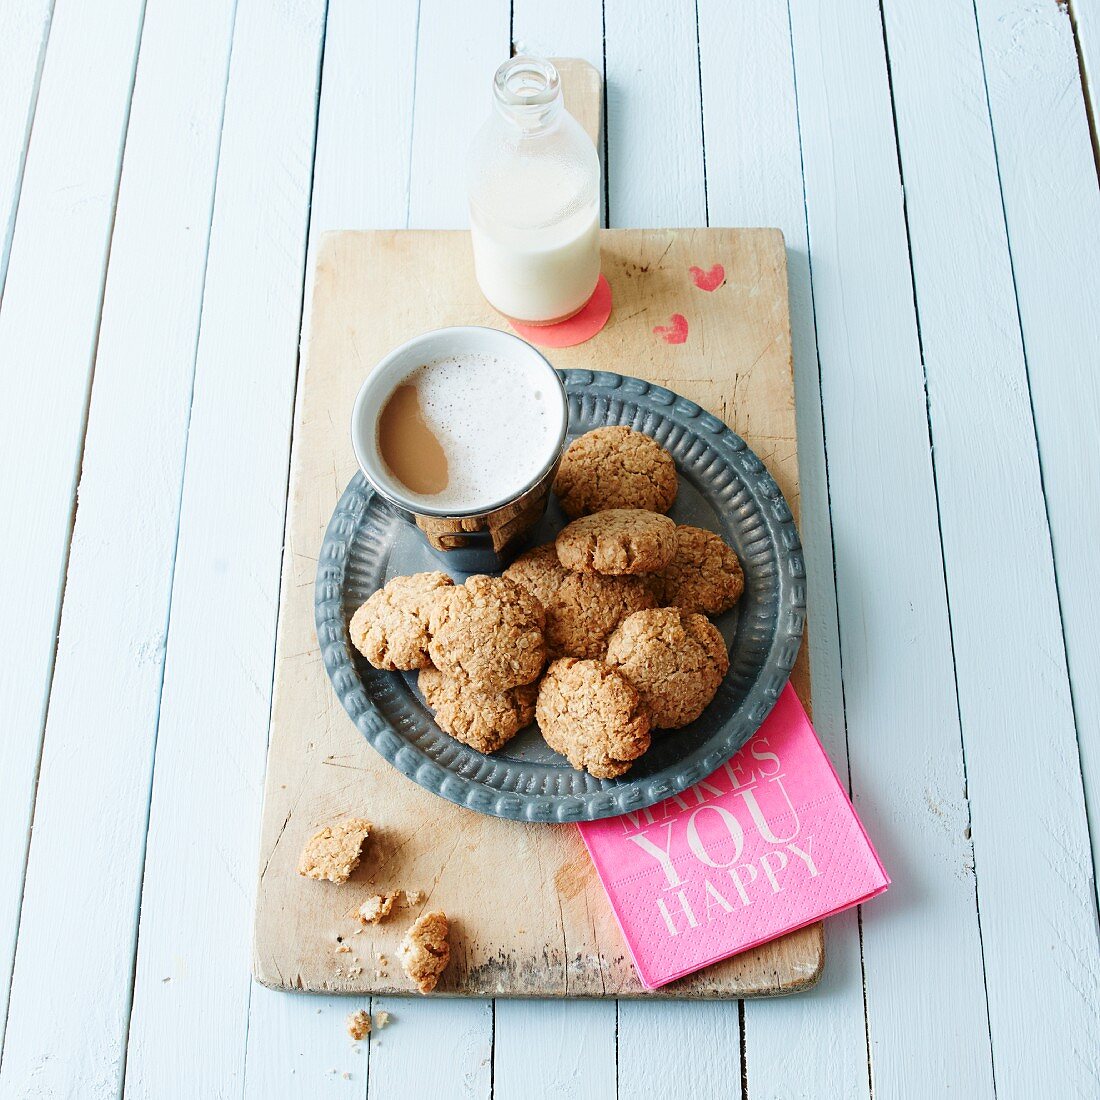 Oatmeal and coconut biscuits with coffee